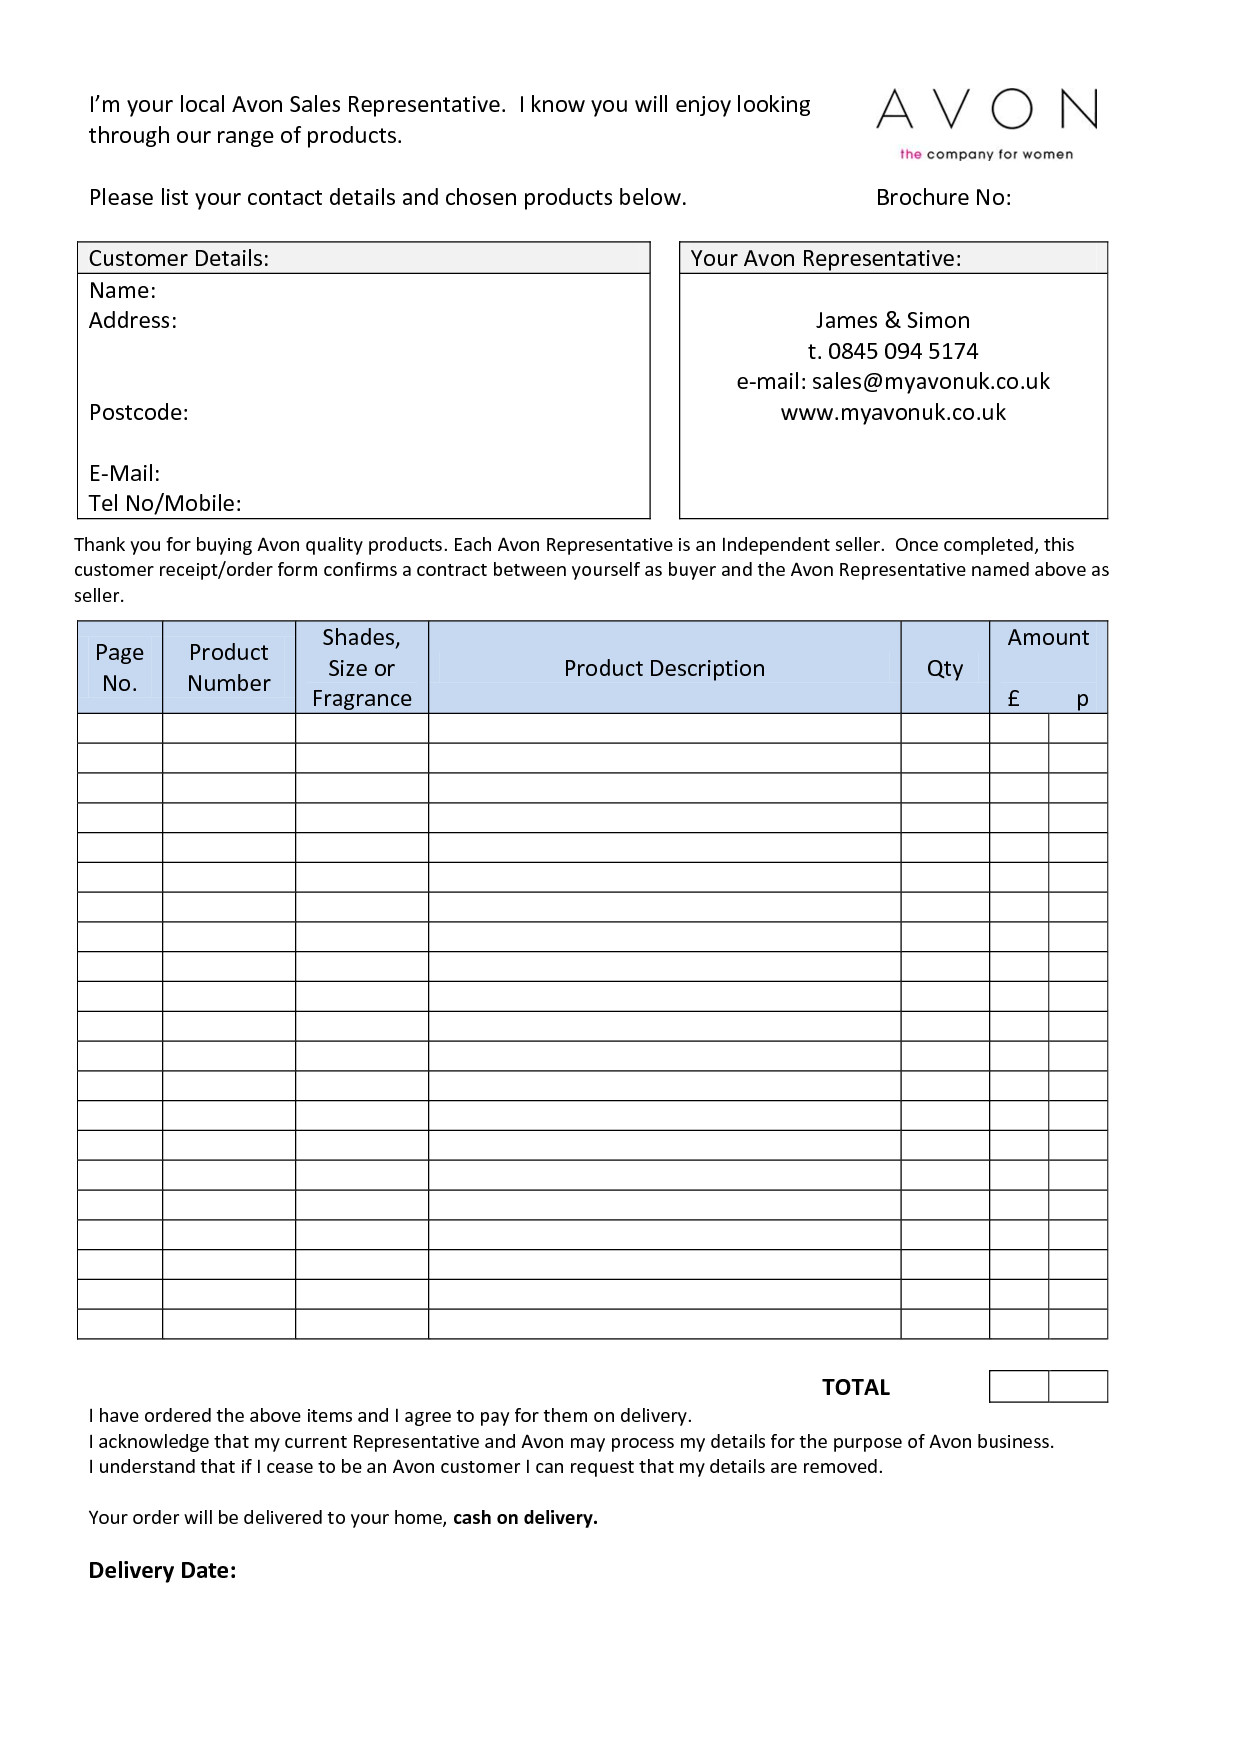 Printable Avon order forms Avon order form 2010 I Like This order form Make Sure to